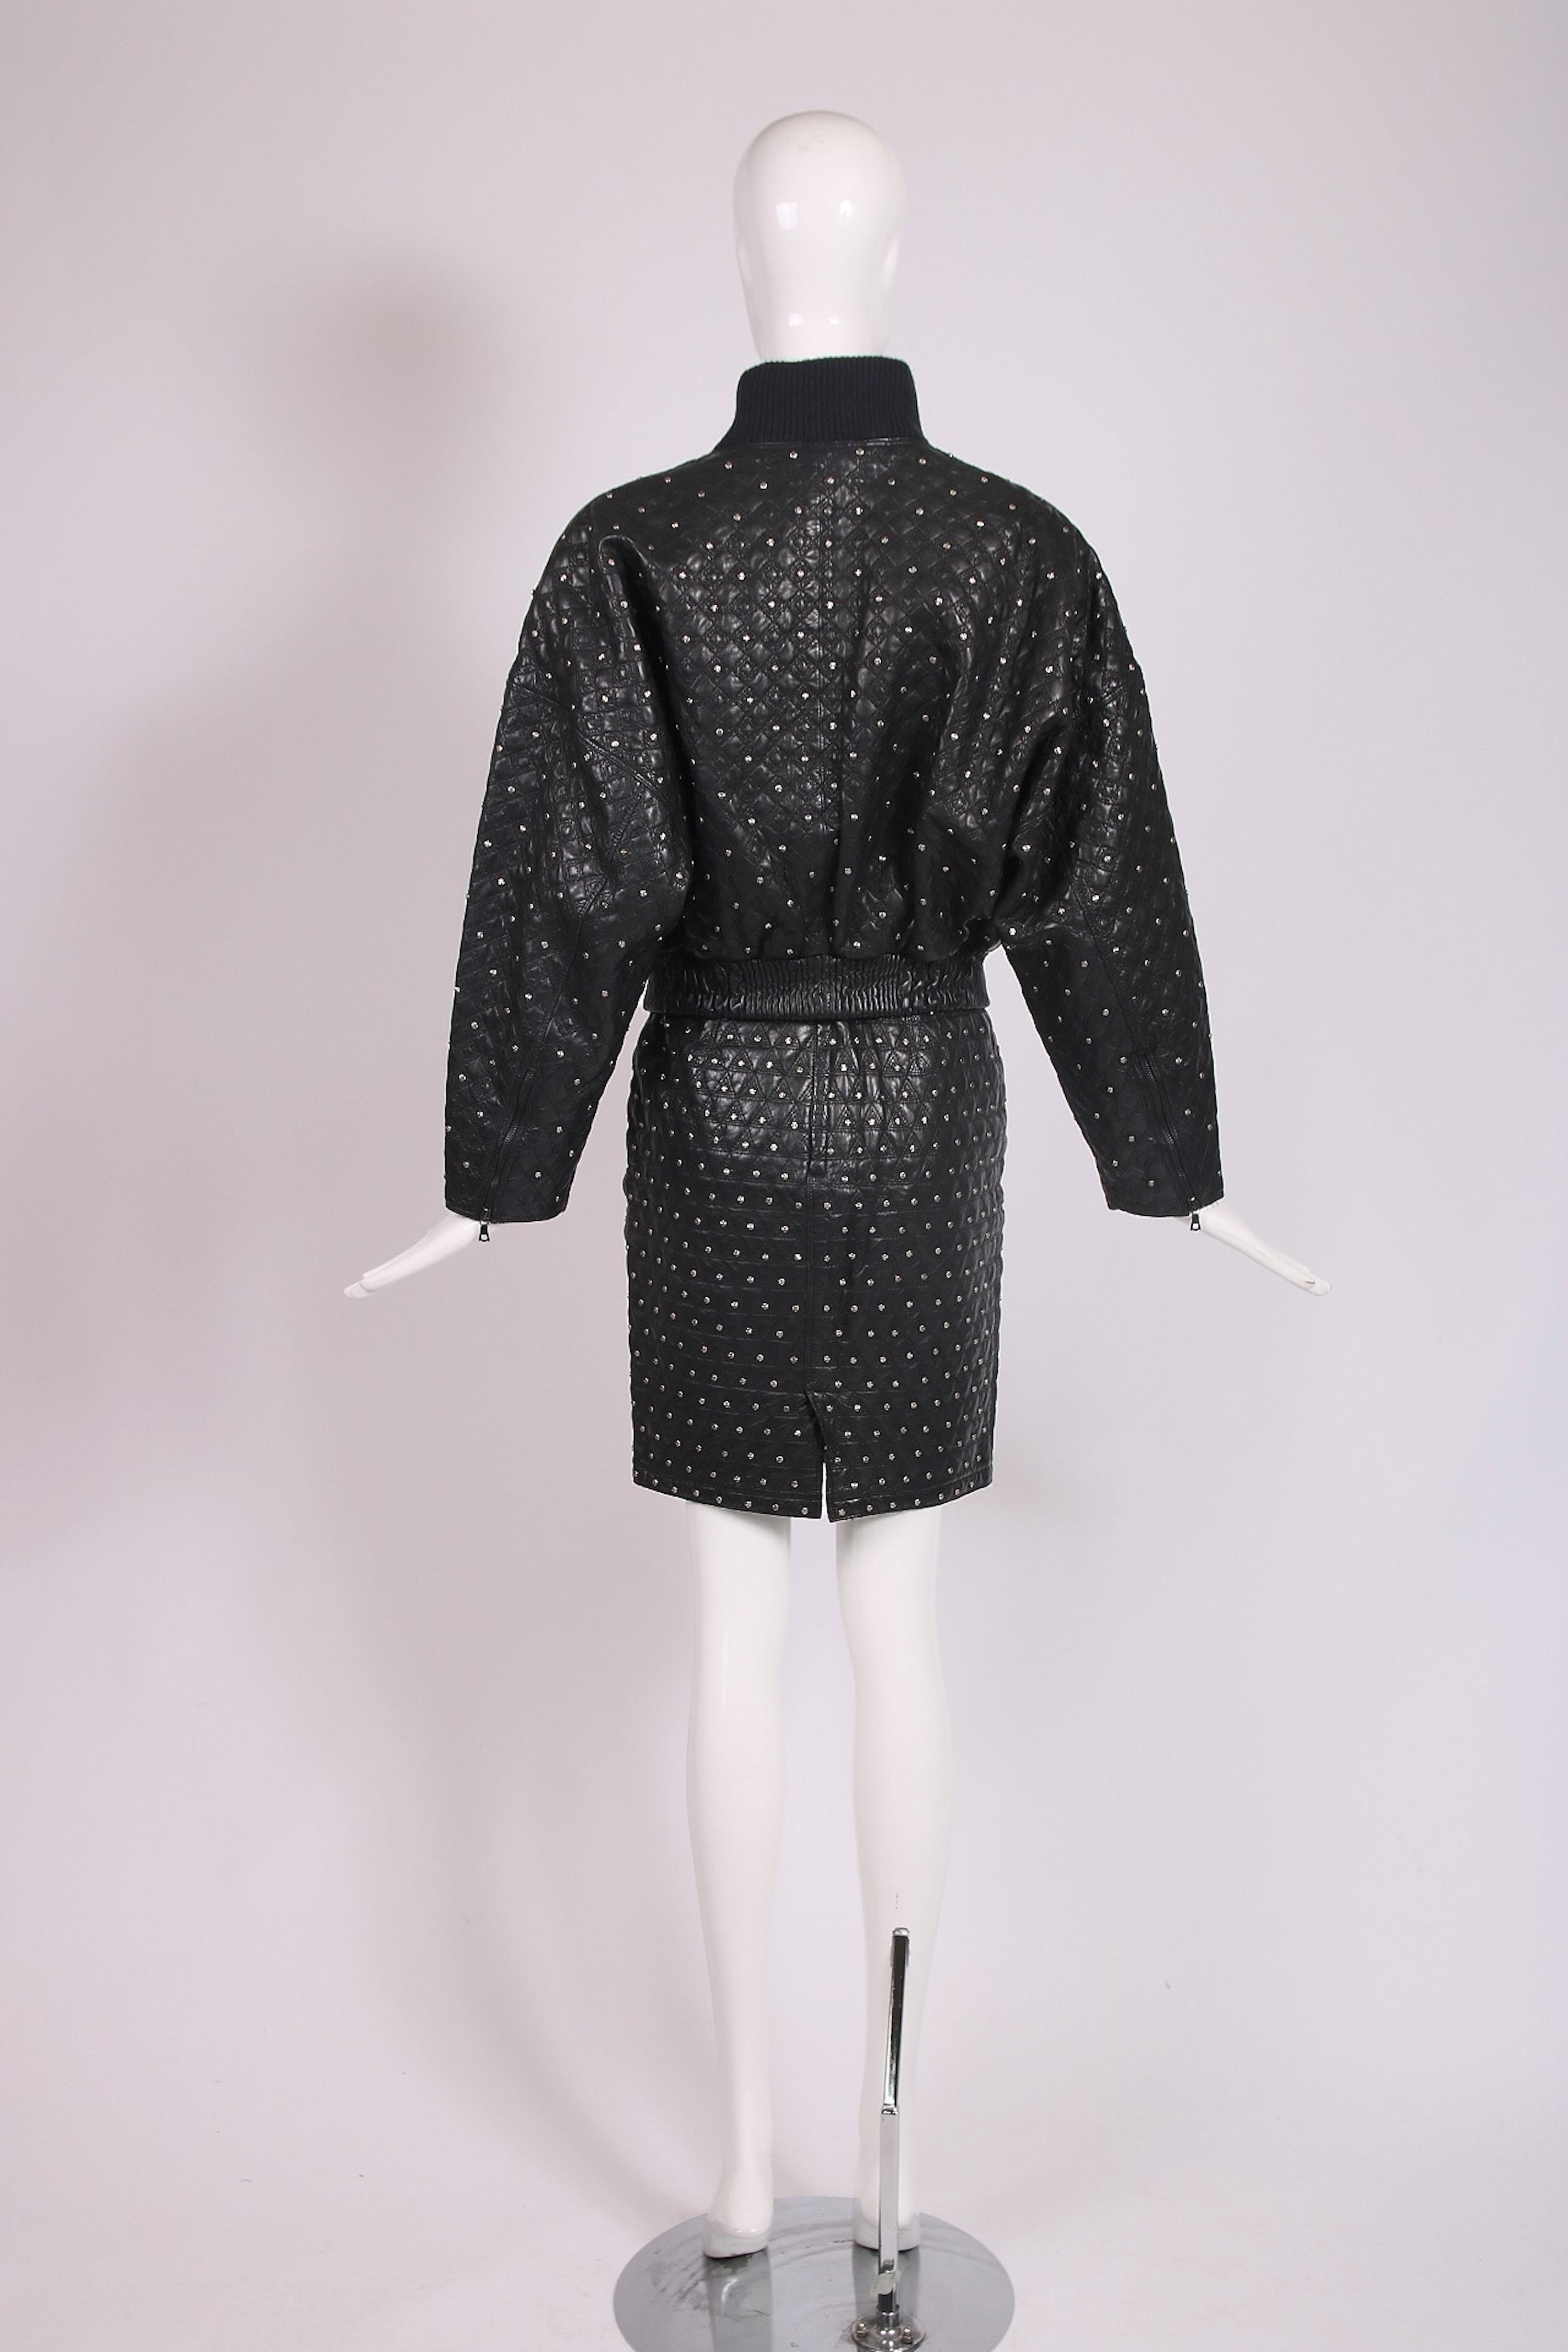 1989 F/W Gianni Versace Black Leather Quilted Skirt w/Silvertone Stud Motif In Excellent Condition For Sale In Studio City, CA